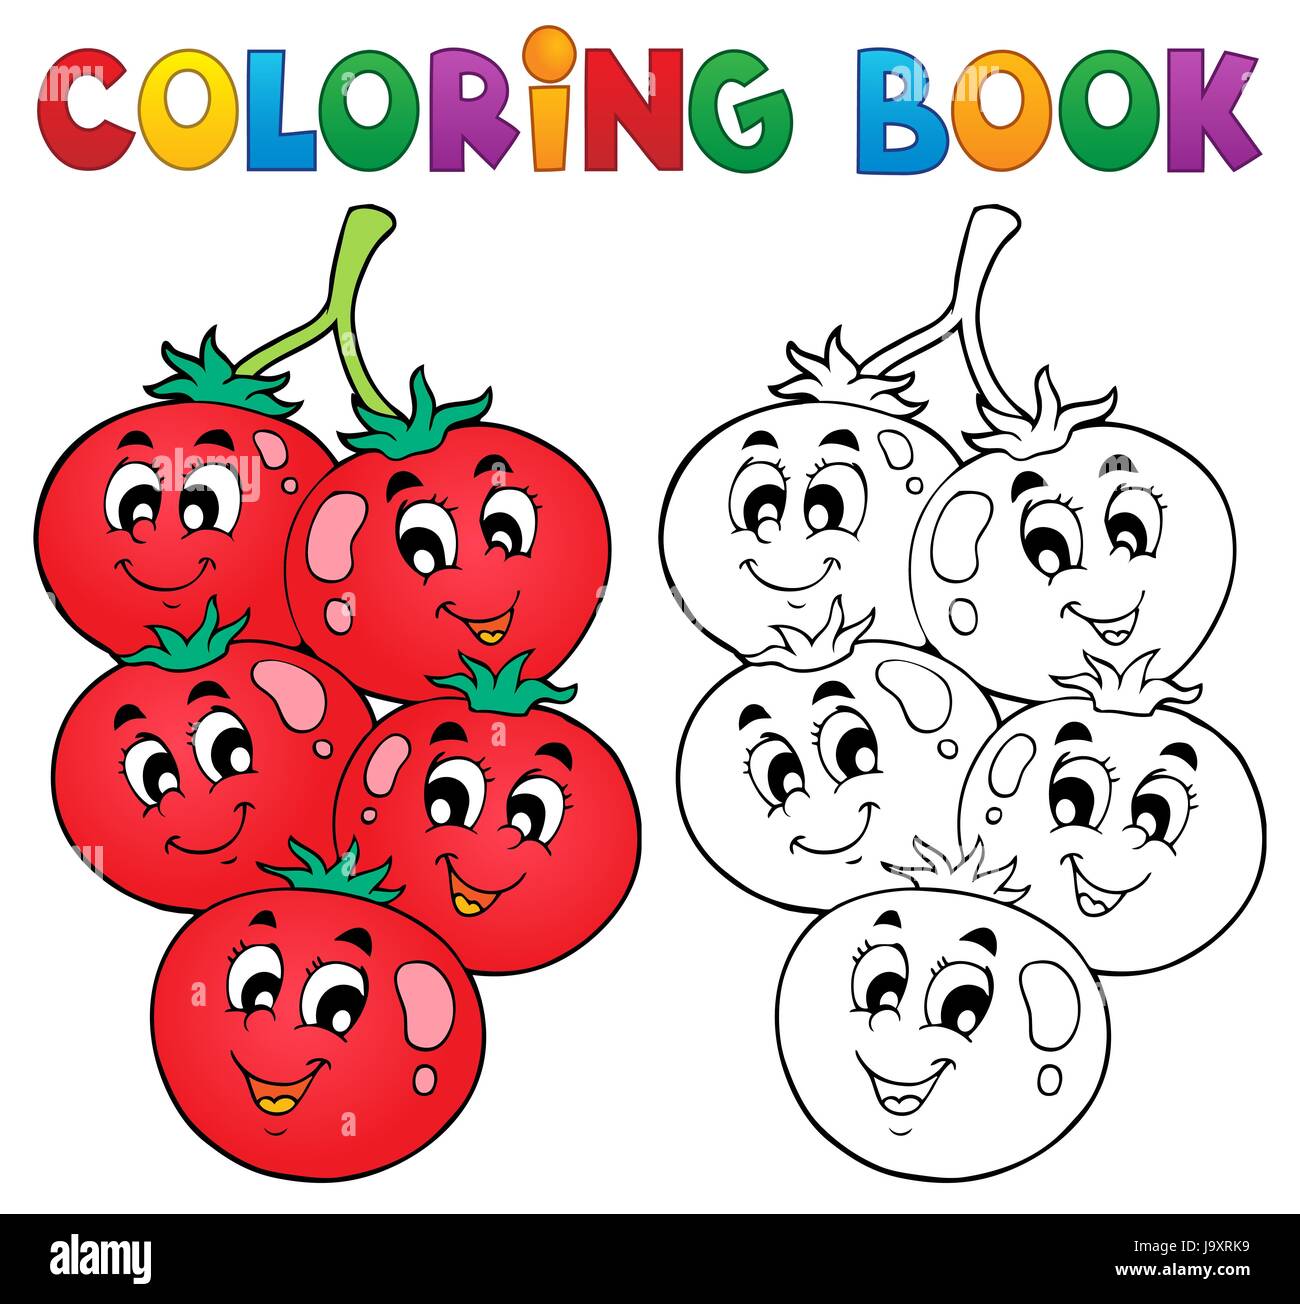 colour, vegetable, paint, tomatoes, tomatos, painted, tomato, colouring, book, Stock Photo